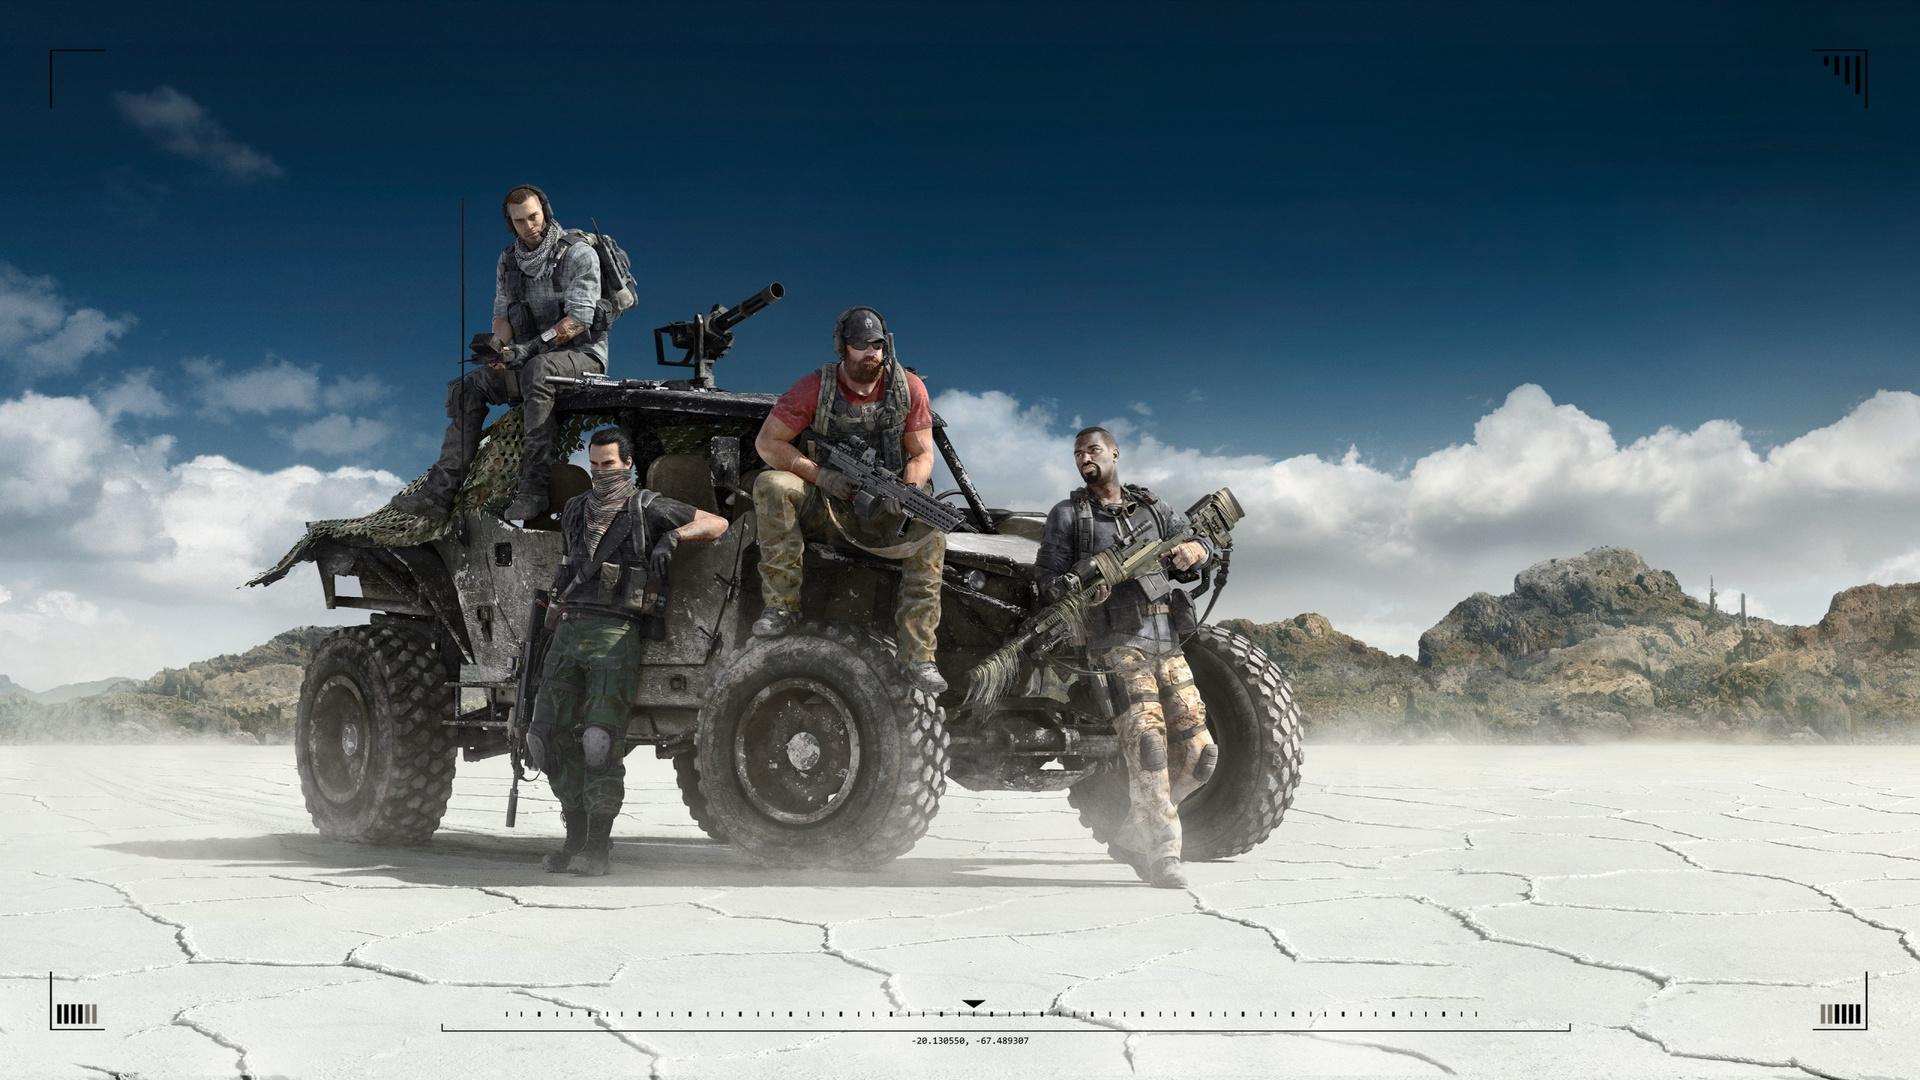 Ghosts and their ride. Wallpaper from Tom Clancy's Ghost Recon